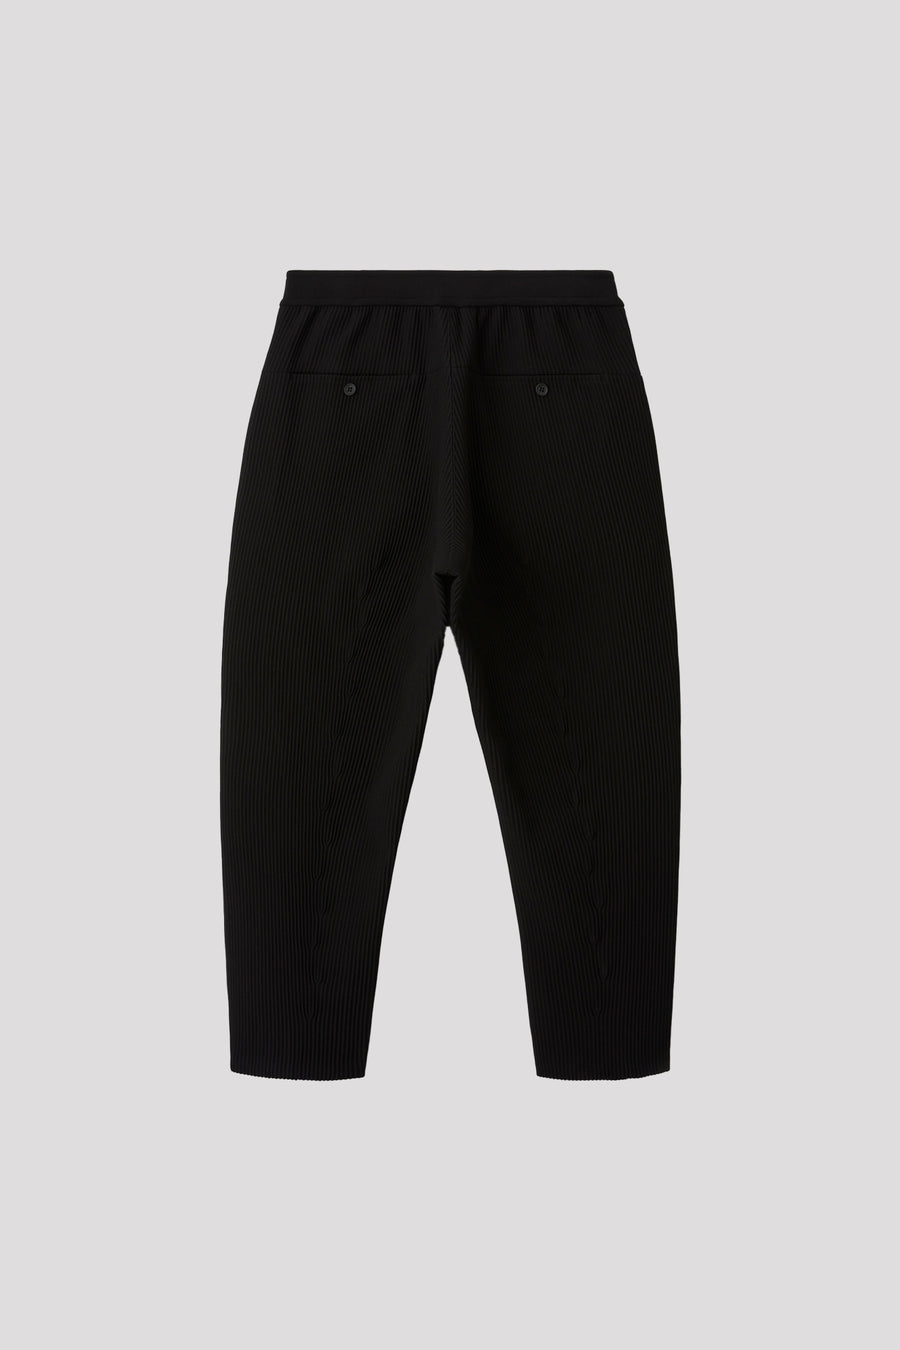 HYPHA TAPERED PANTS